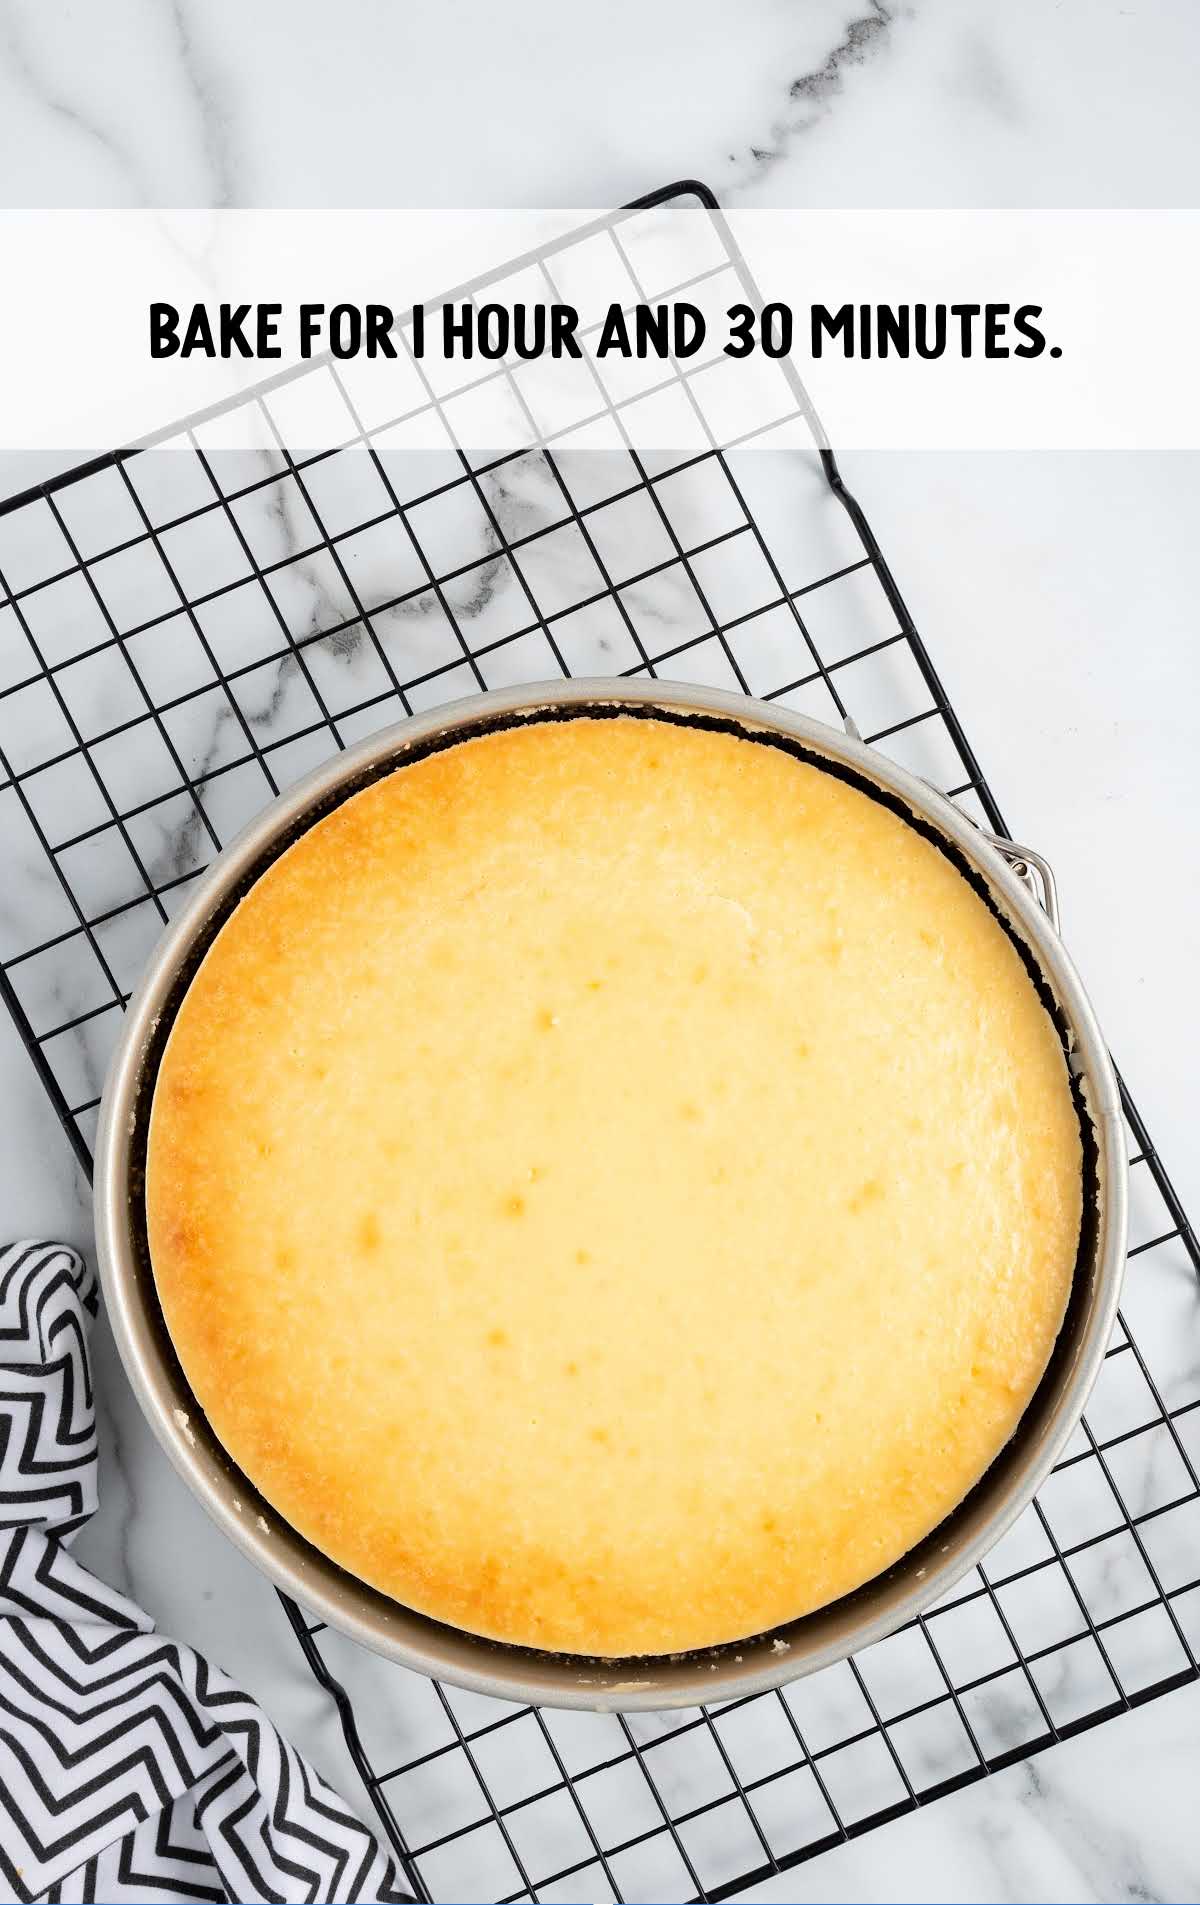 cheesecake baked for 1 hour and 30 minutes